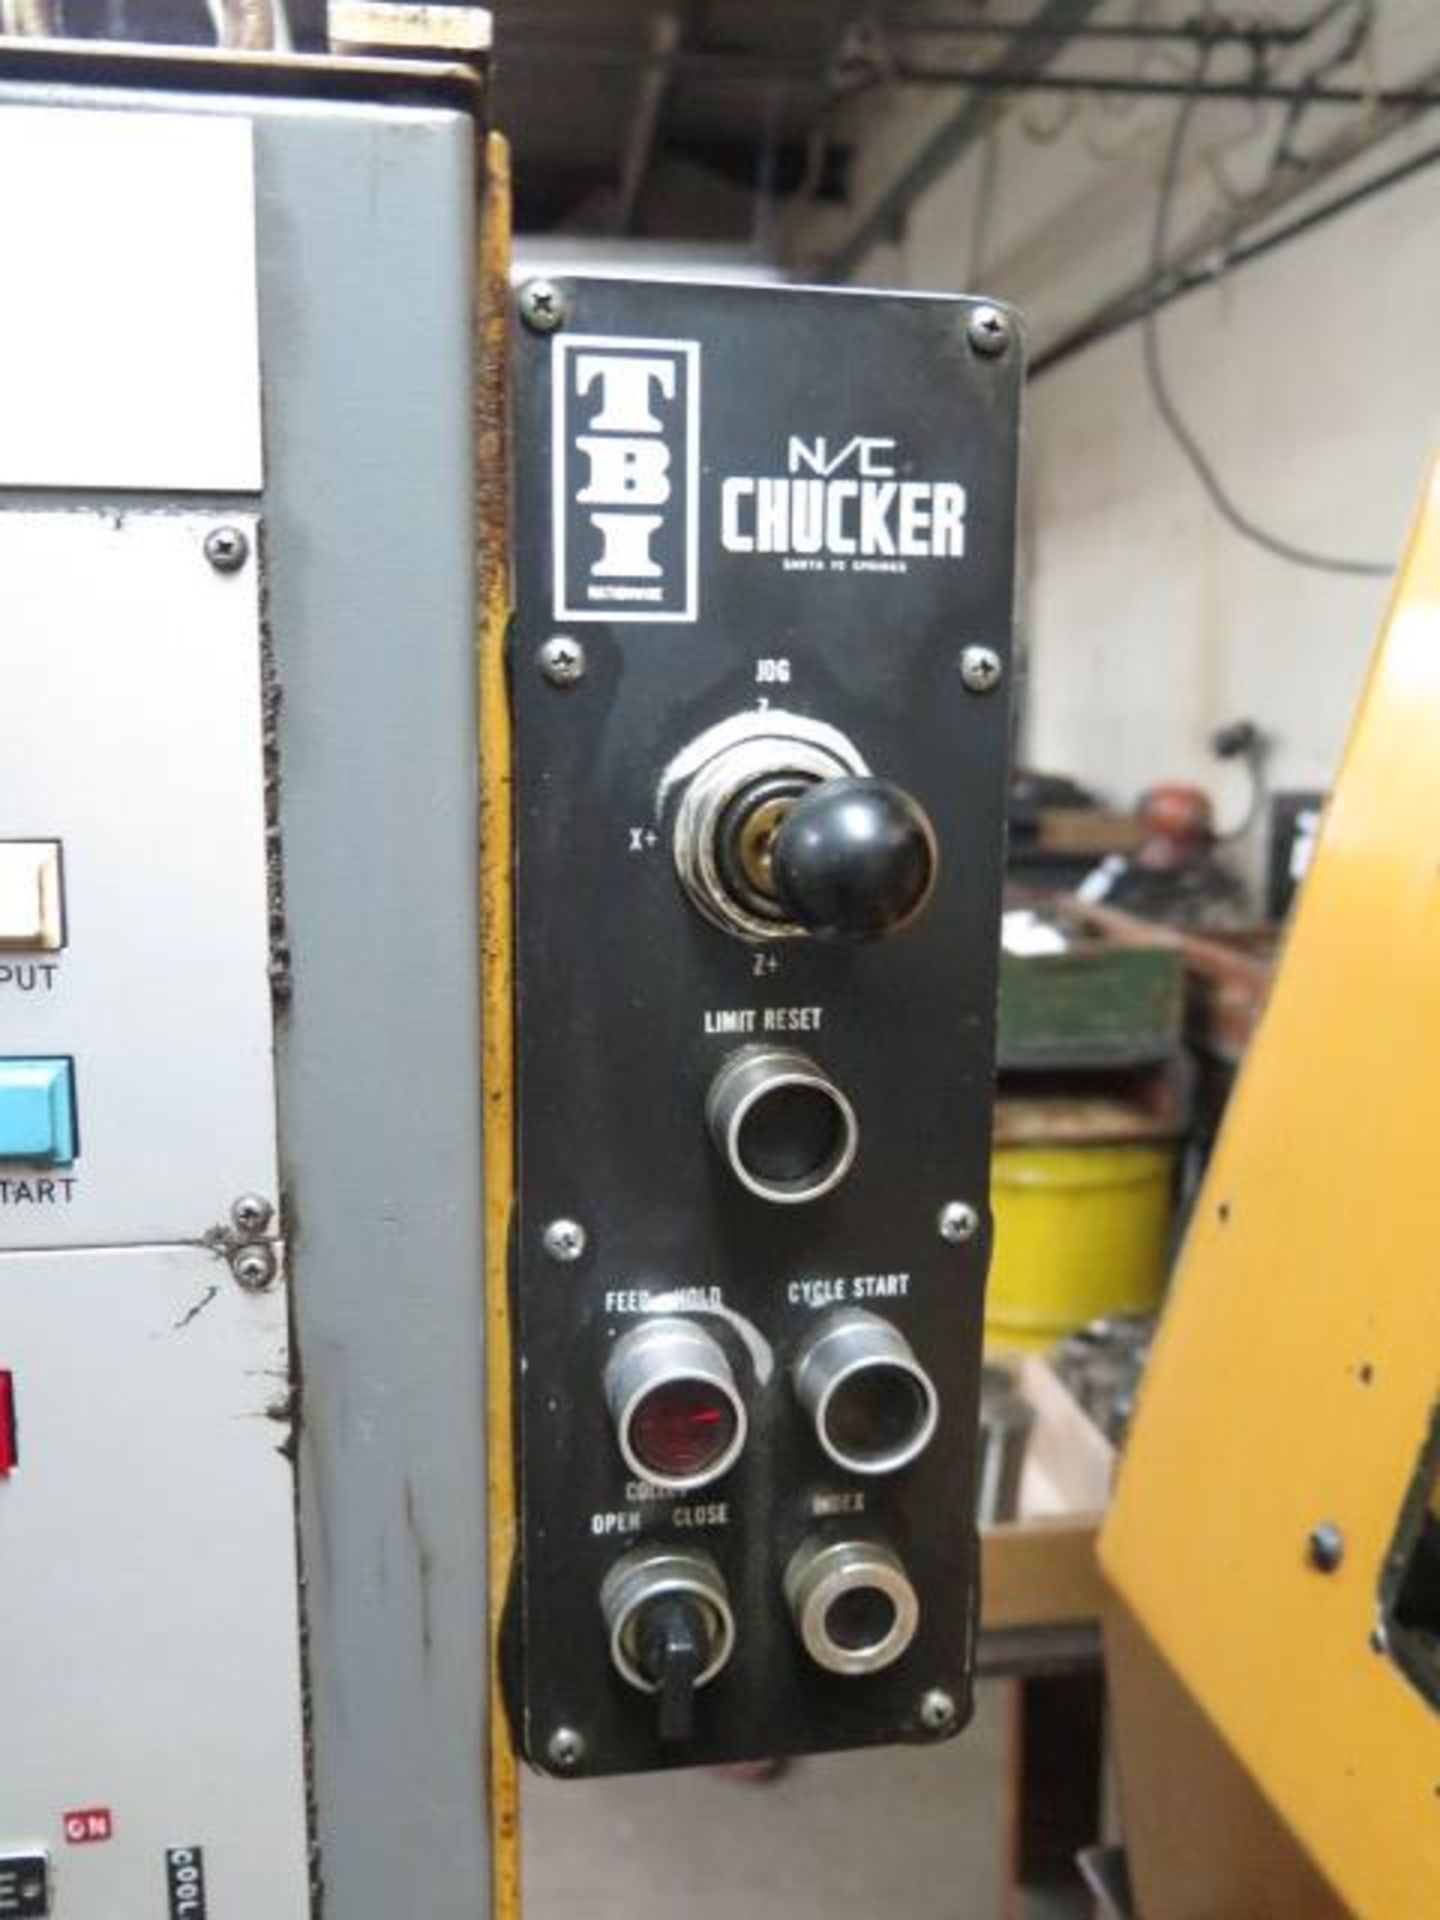 TBI CNC Chucker w/ GN 5 Series CNC Controls, 8-Station Turret, No.251 Collet Spindle, SOLD AS IS - Image 6 of 12